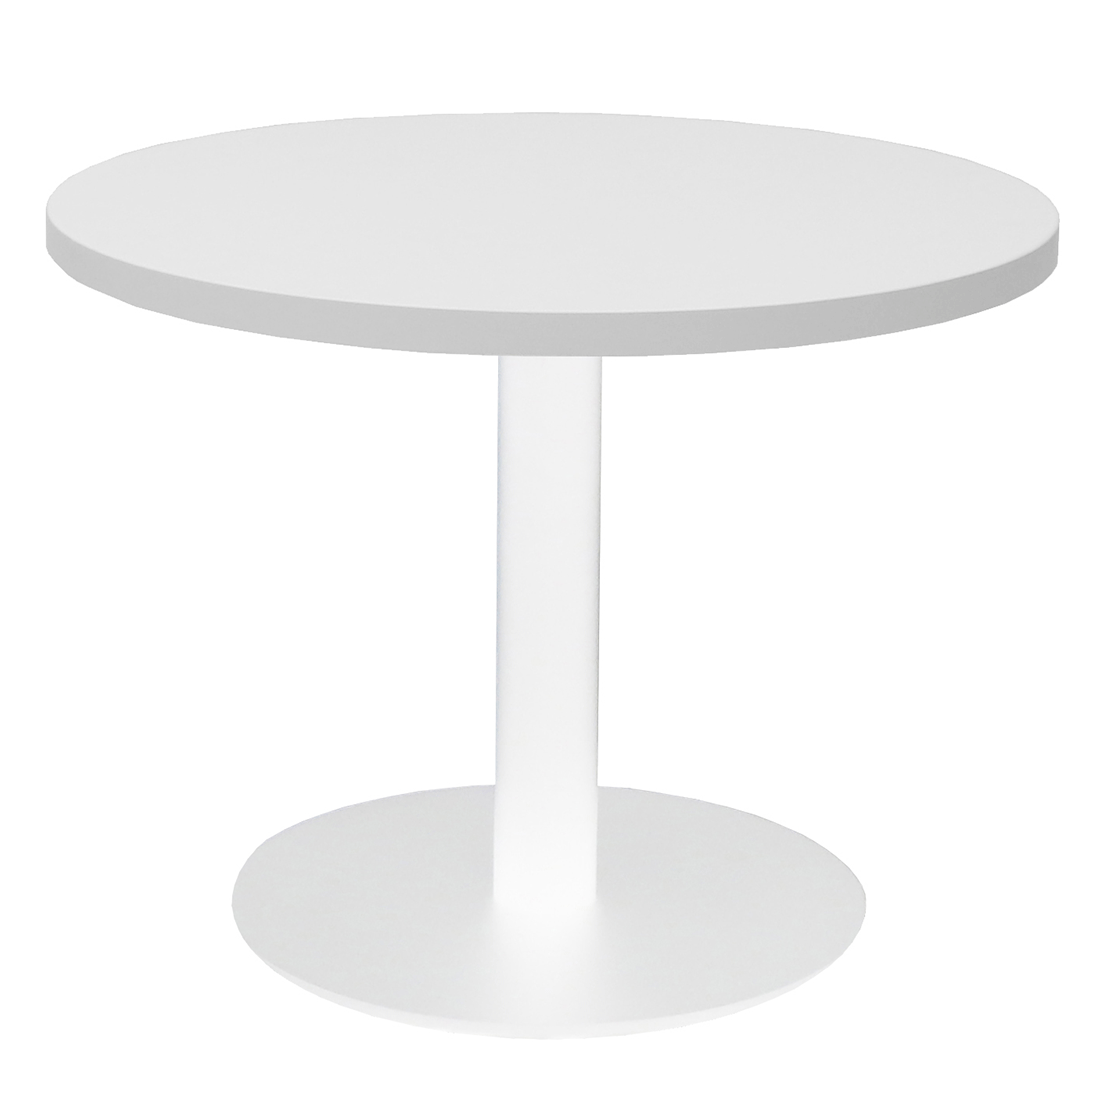 Round Coffee Table with flat Disc Base - switchoffice.com.au